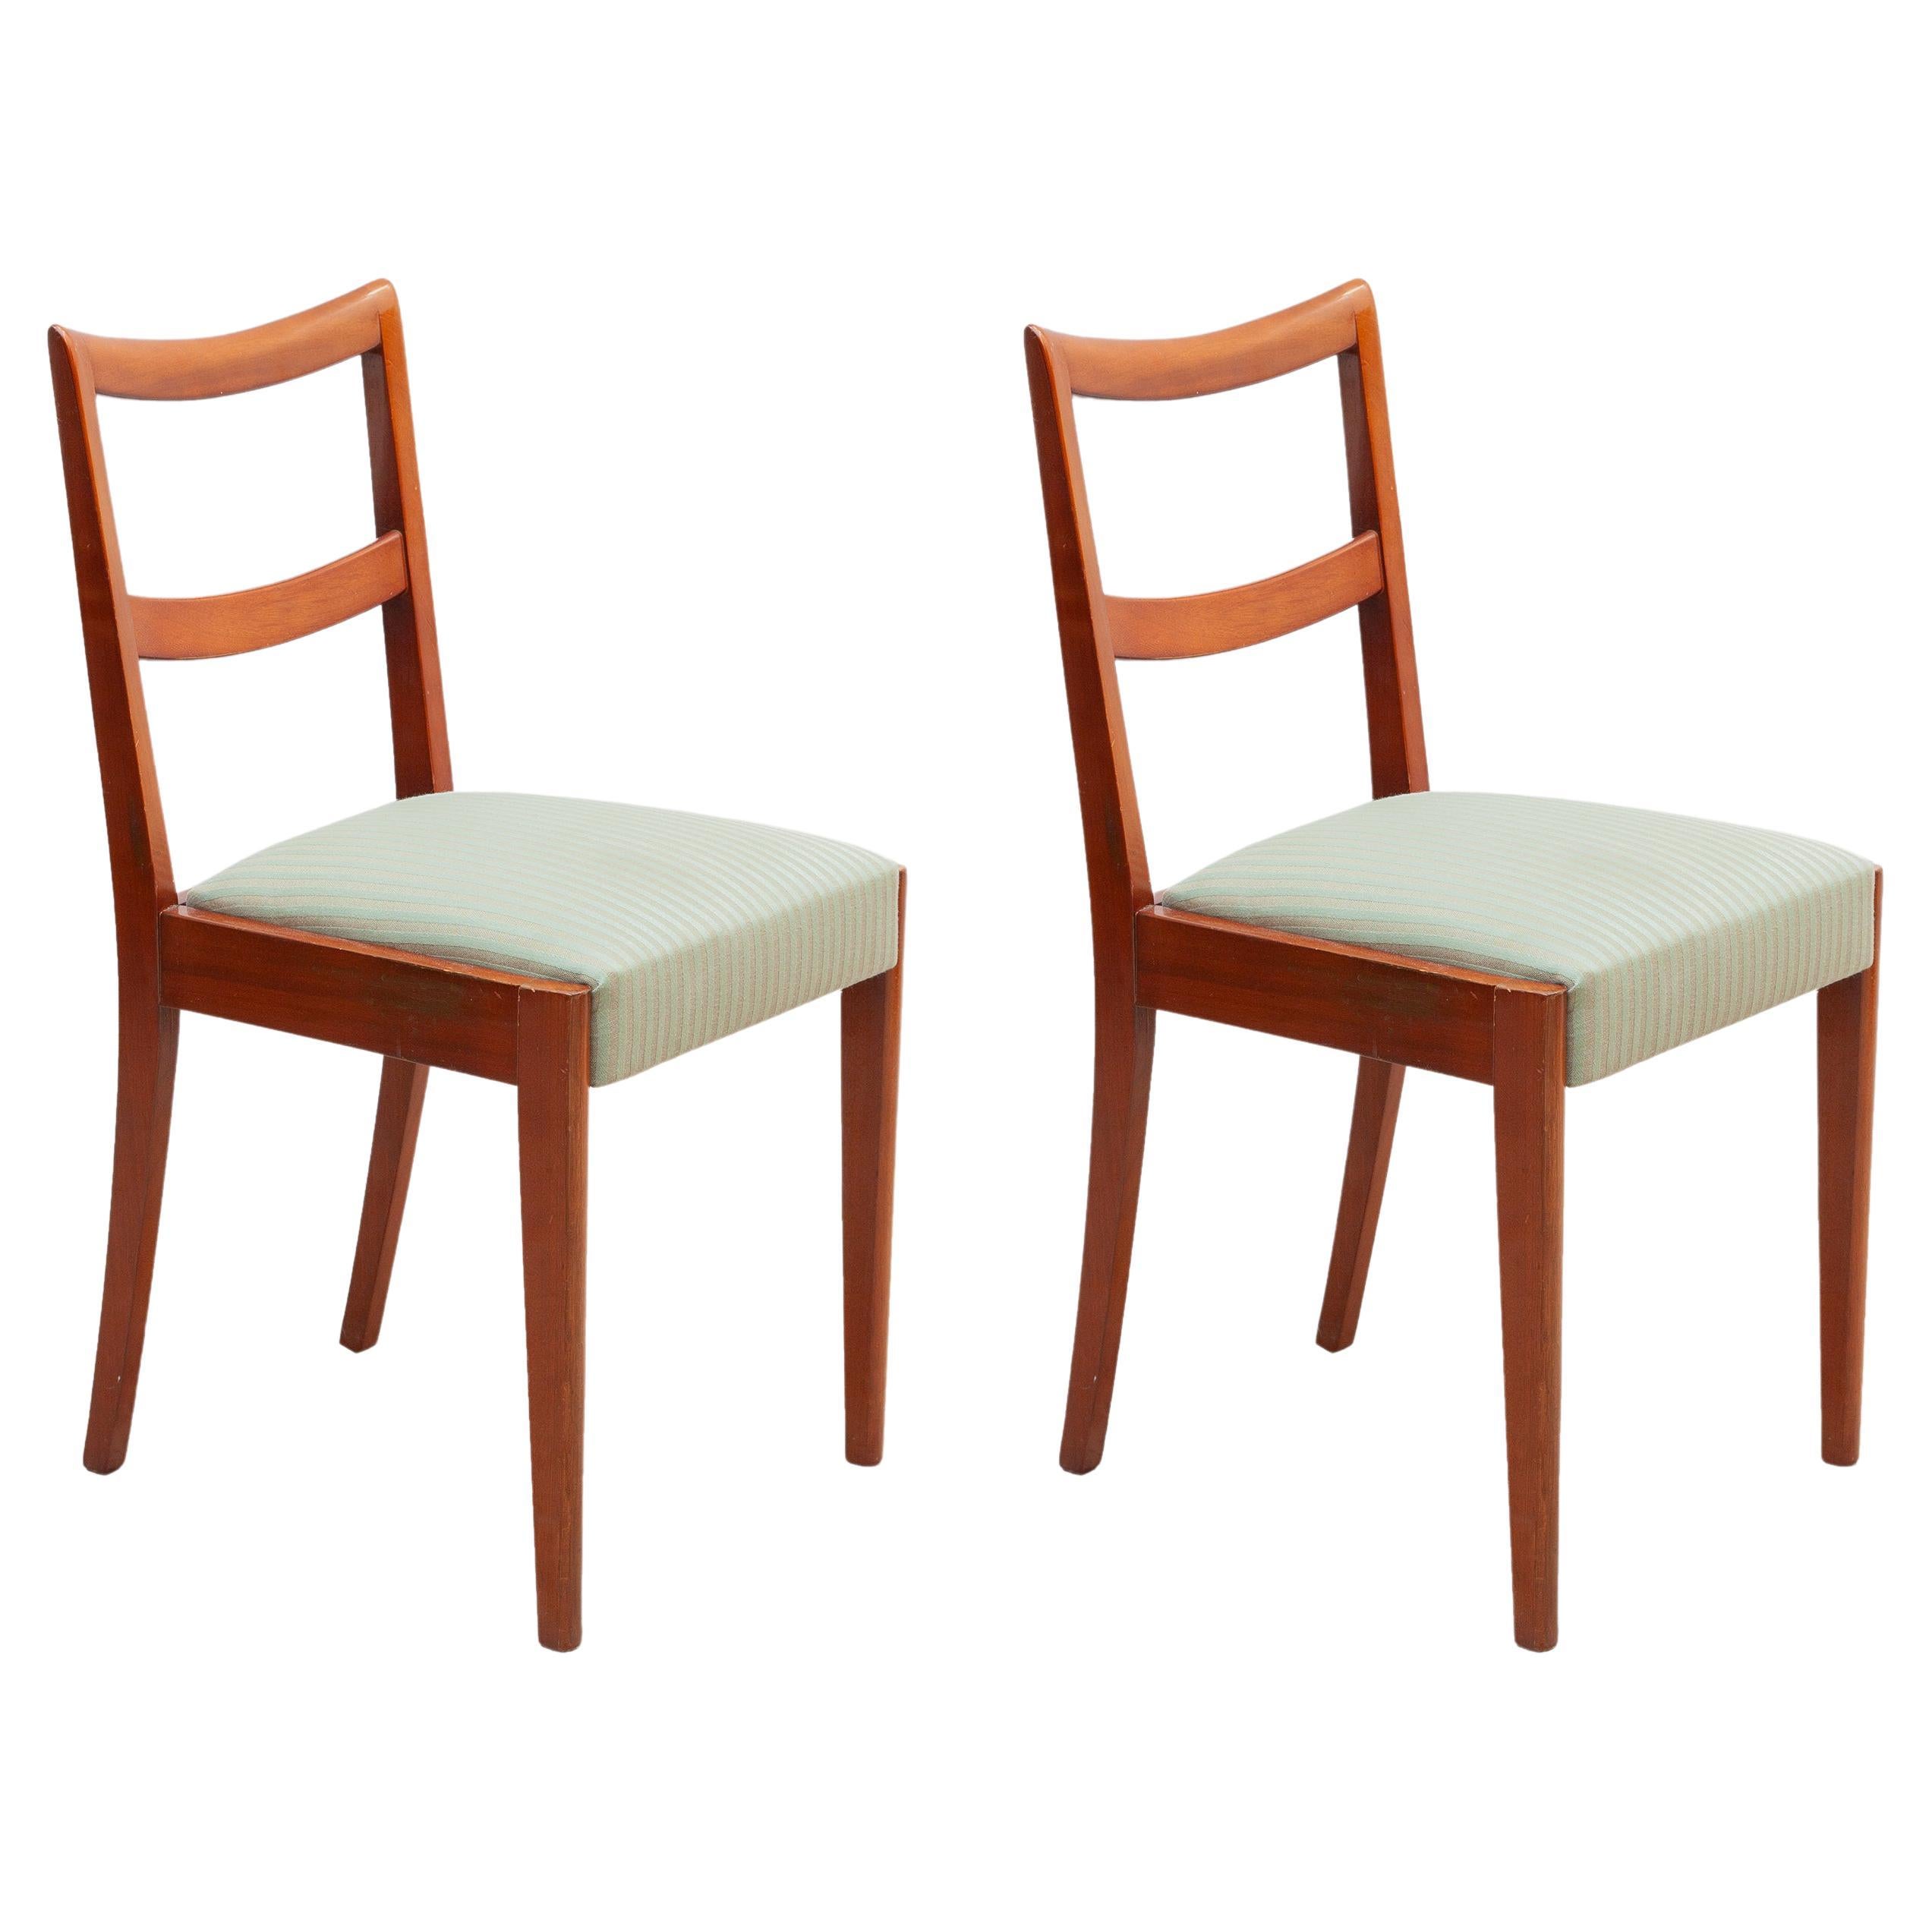 Set of Two De Coene Side chairs, 1930s For Sale